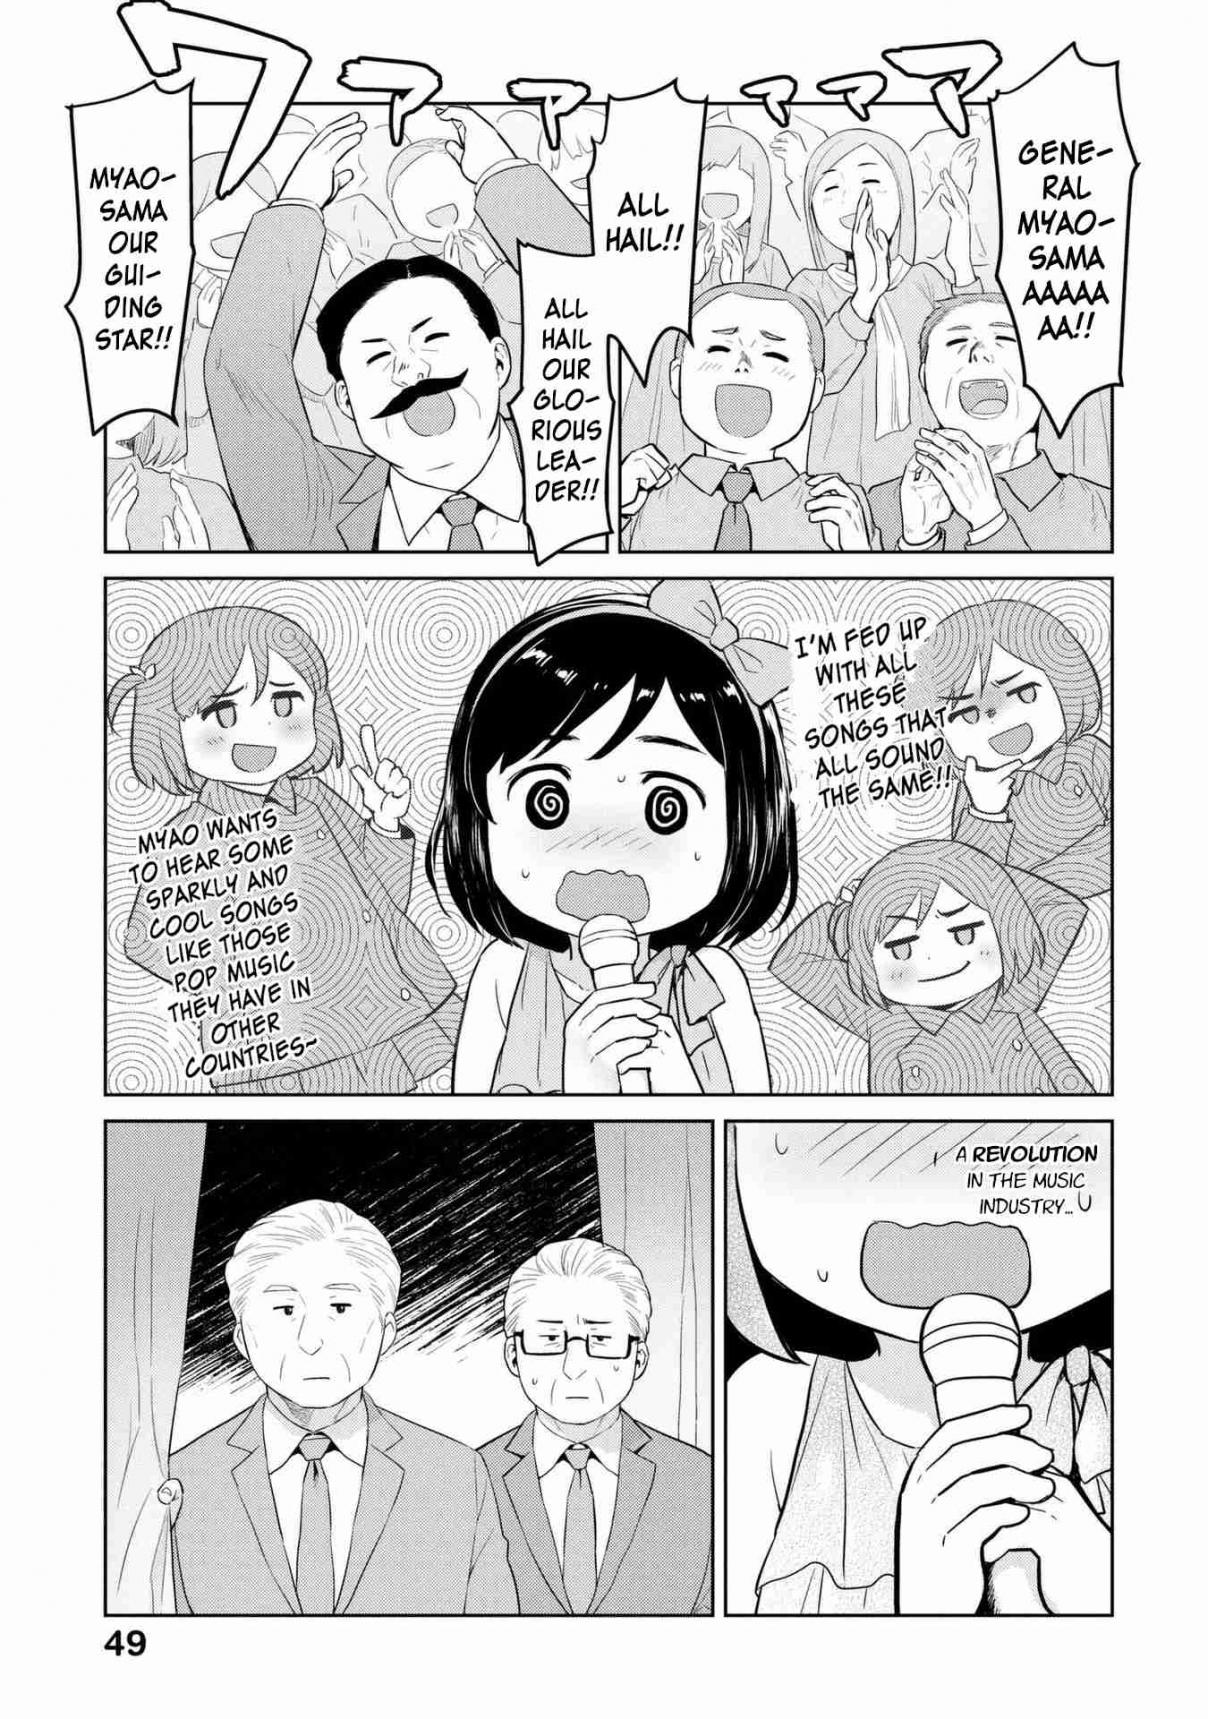 Oh, Our General Myao Vol. 1 Ch. 5 In Which Myao Sings Her Heart Out